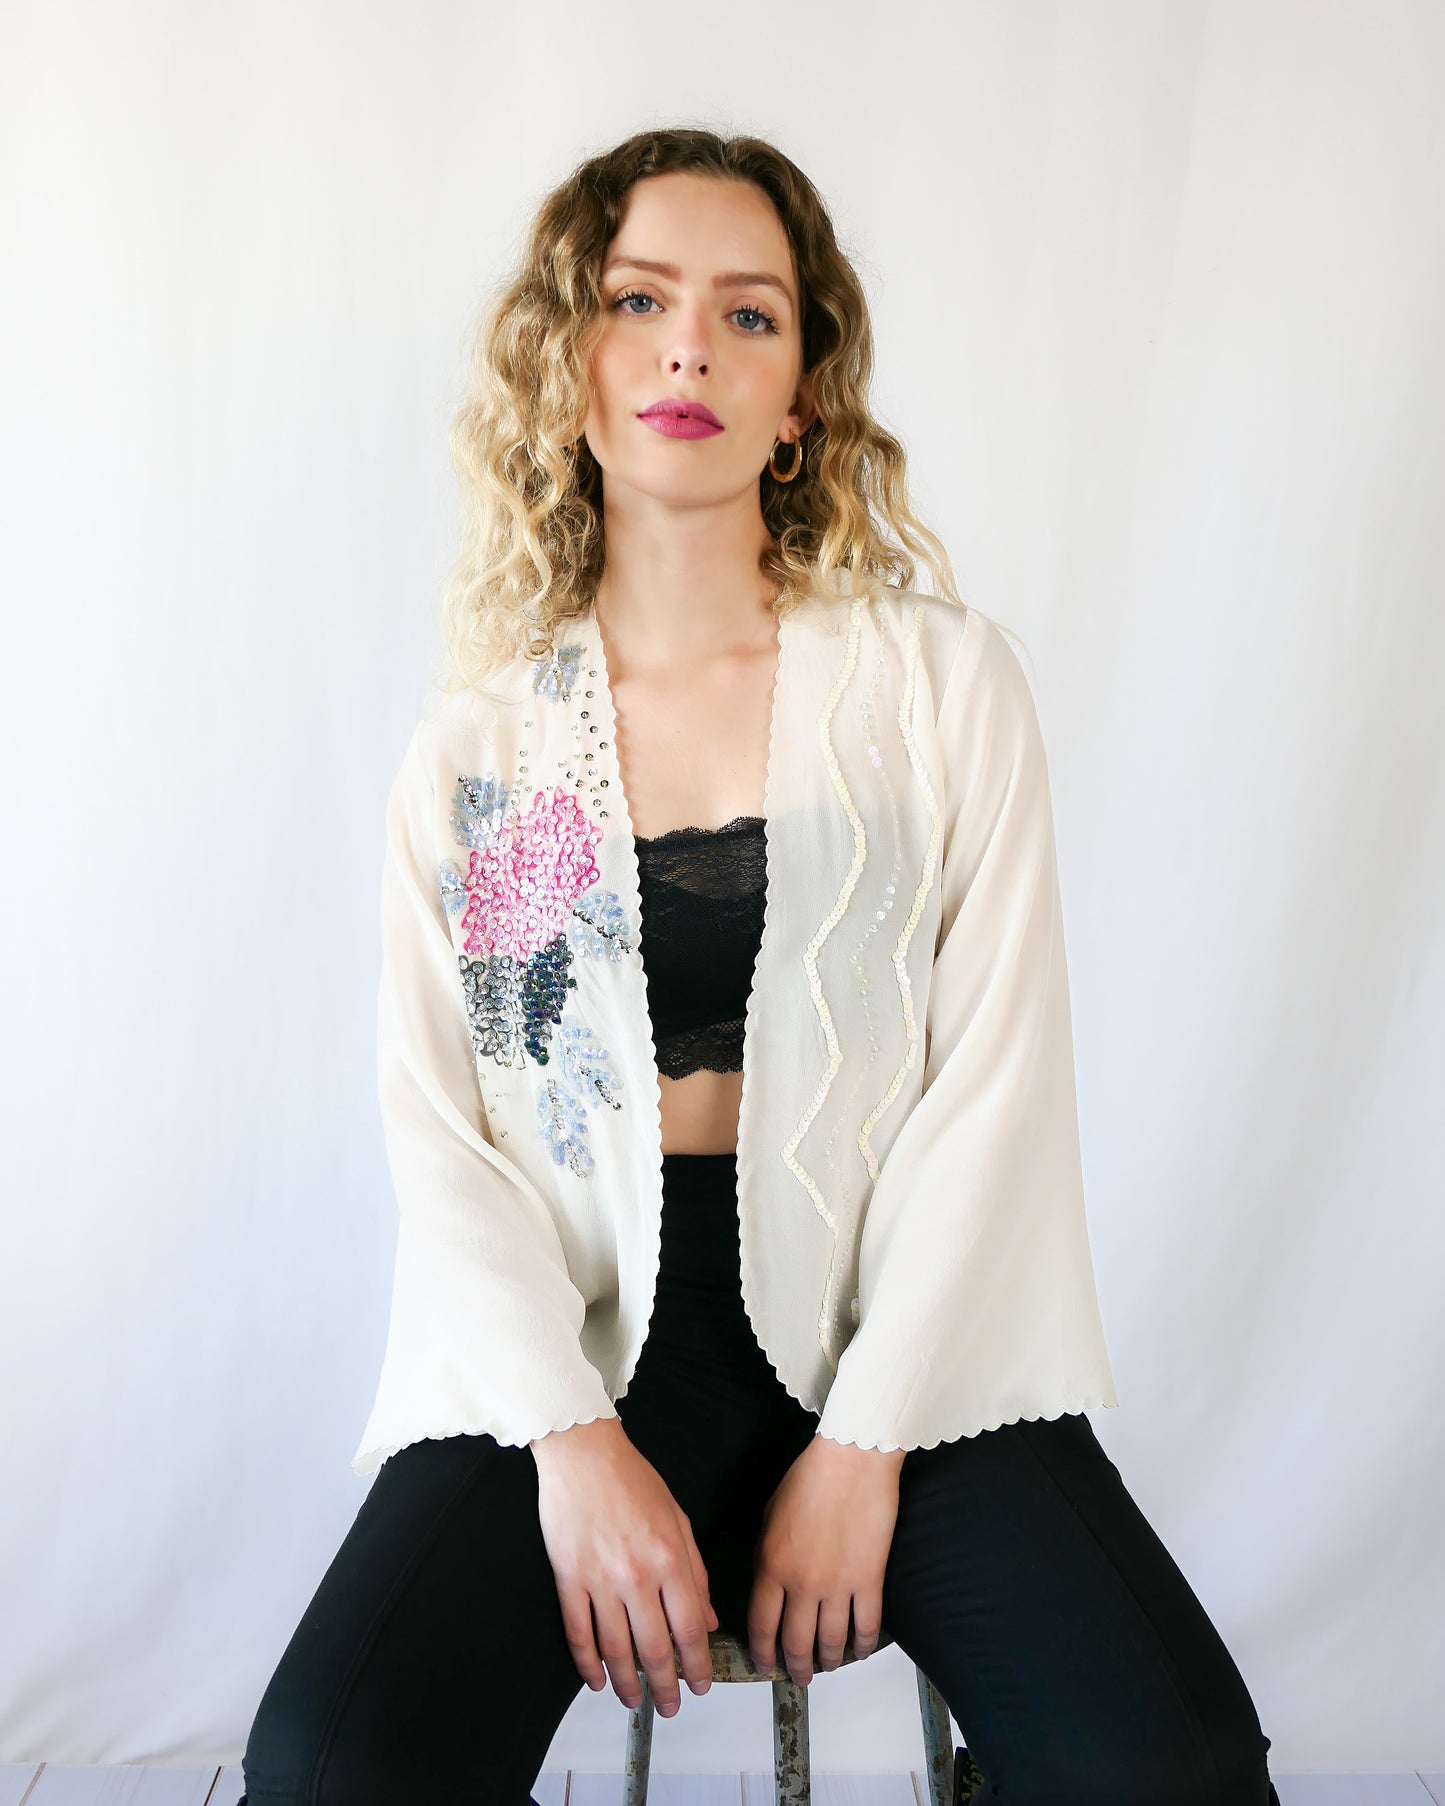 From Lim's Vintage: An elegant hand painted silk kimono top that drapes over effortlessly, with a relaxed fit and elegent scalloped edging along the borders and sleeve hem. Hand painted pink peony flowers and muted lavender grey and black foliage are adorned with iridescent and silver sequins.  One size fits most.  Size: One Size   Measurements:  Bust 42” Waist 41" Length 24” Shoulder width 15” Sleeve 20.5” Color: Ivory   Material: 100% silk with plastic sequins